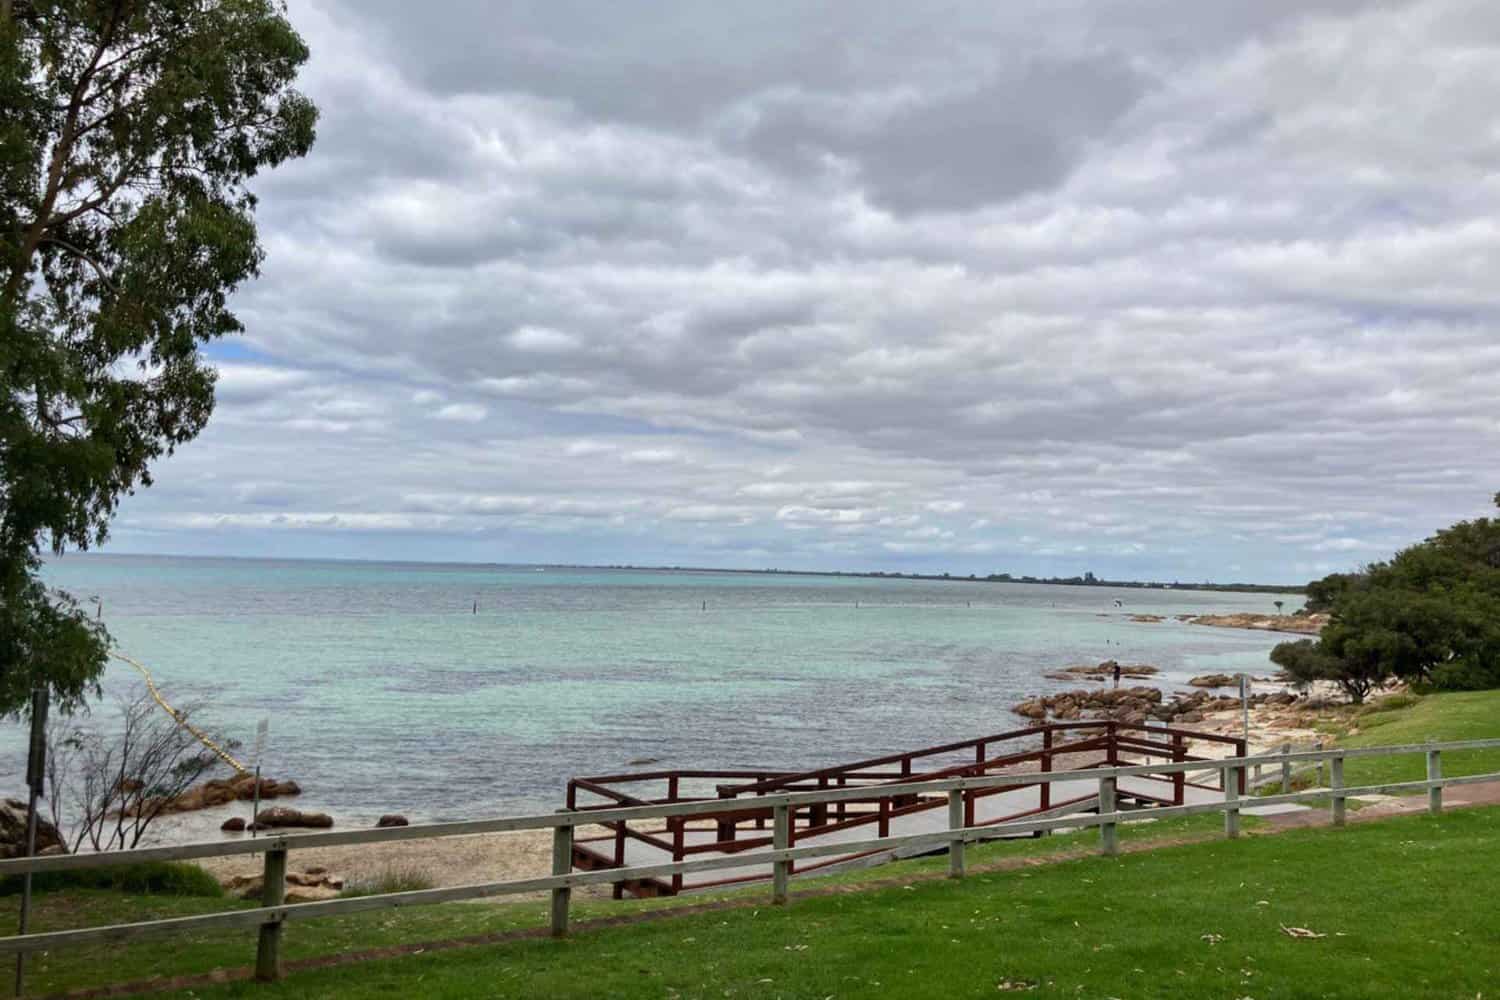 Overcast skies above the turquoise waters of Dunsborough beaches, with a lush green park and wooden fence in the foreground.